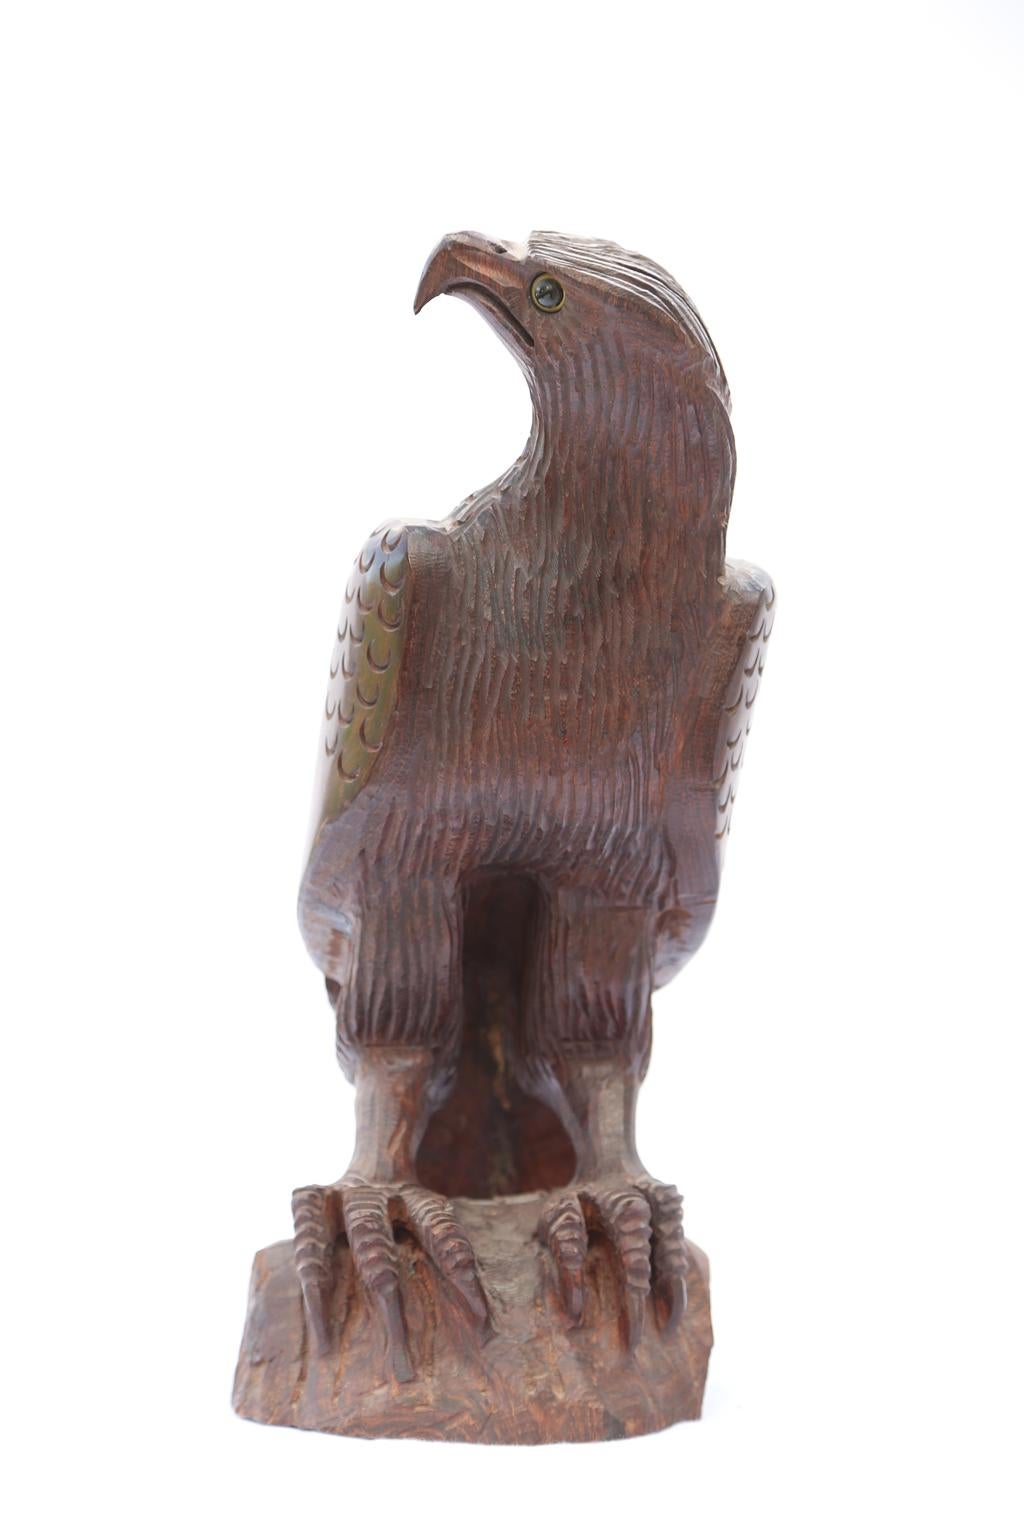 Hand carved eagle, of rosewood, perched upon rockery, with glass eyes. Highly stylized bird-of-prey with exaggerated angular beak, head and large talons. 

Stock ID: 1902.